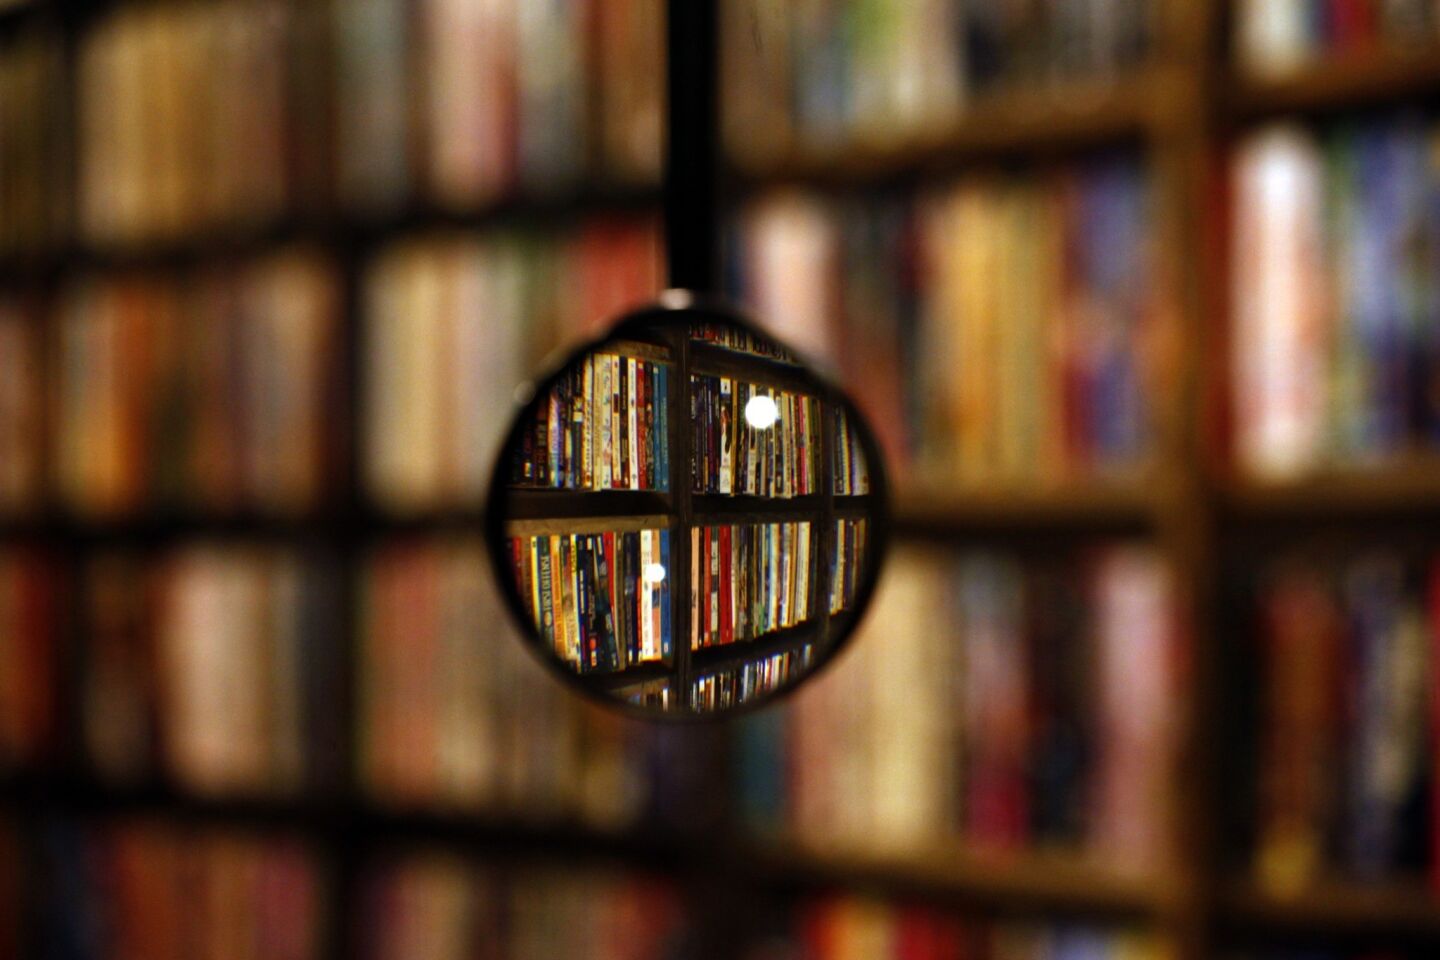 A magnifying glass, hanging from the ceiling, brings books into a sharper focus.